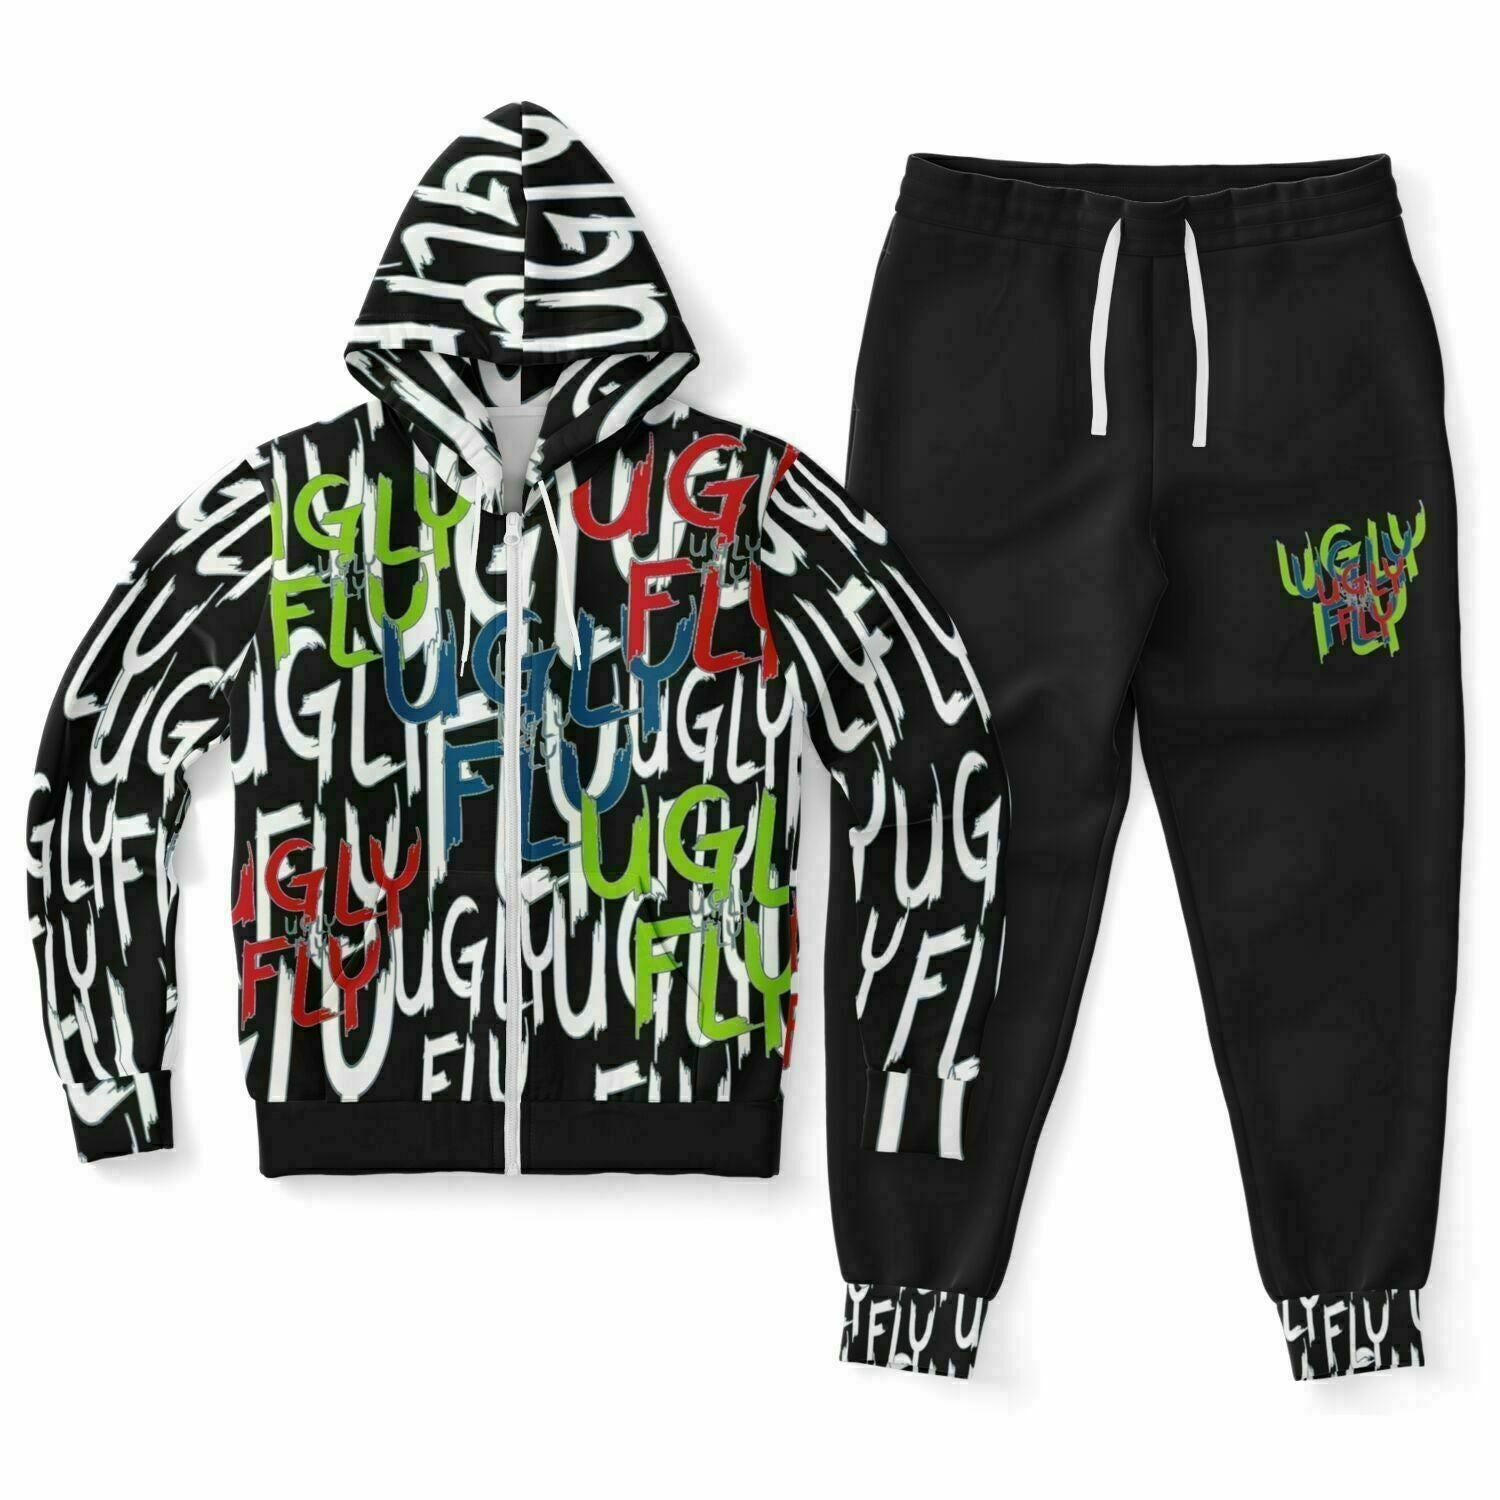 4XL - Ugly Fly Premium Fashion Jogging Suit - Fashion Ziphoodie & Jogger - AOP at TFC&H Co.